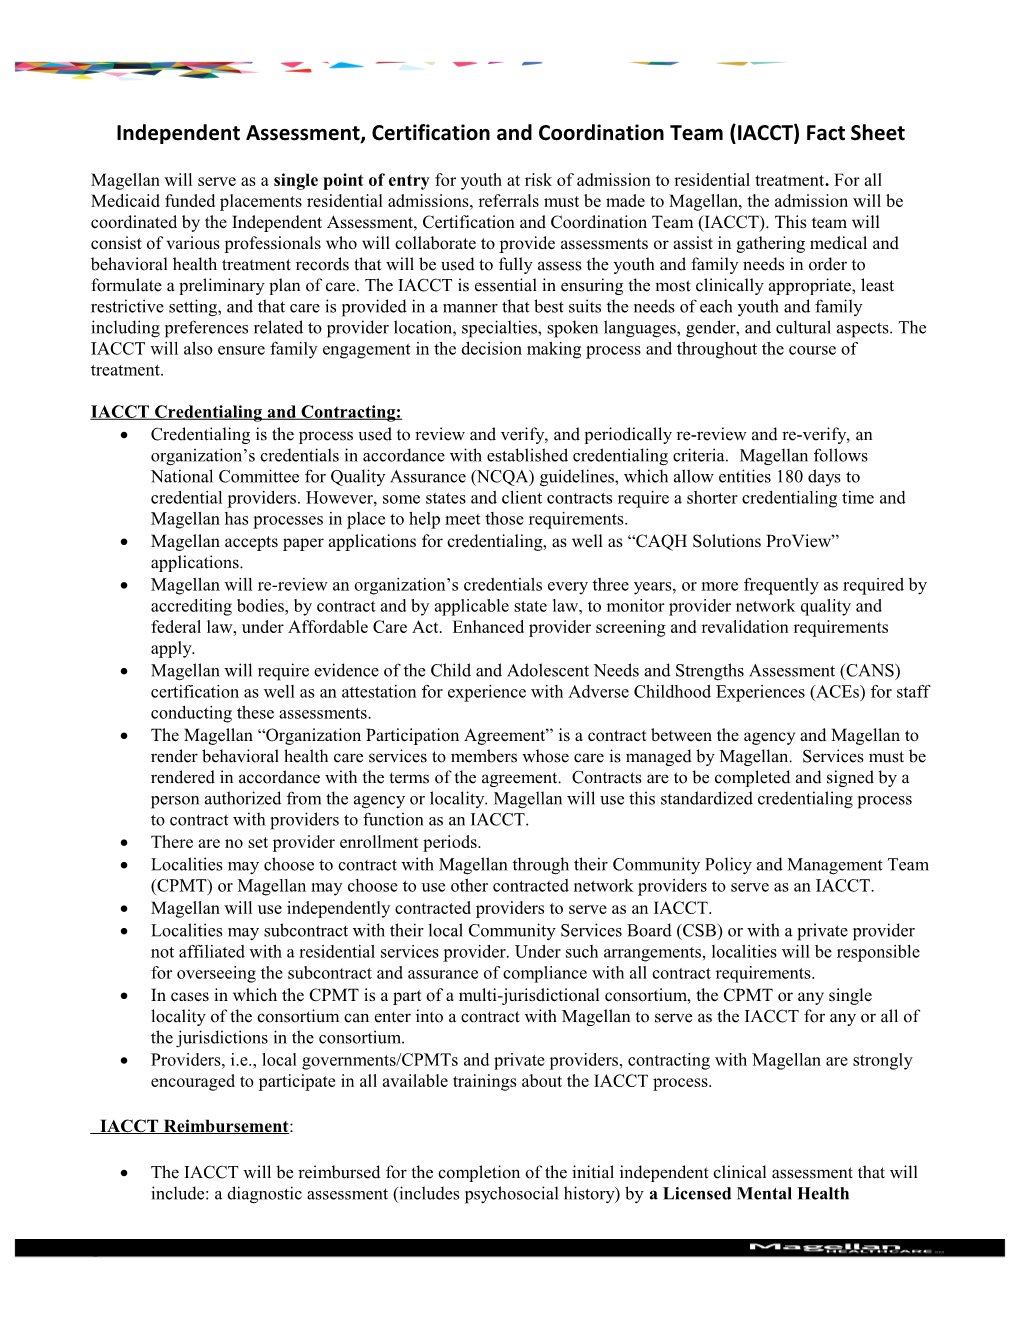 Independent Assessment, Certification and Coordination Team (IACCT) Fact Sheet